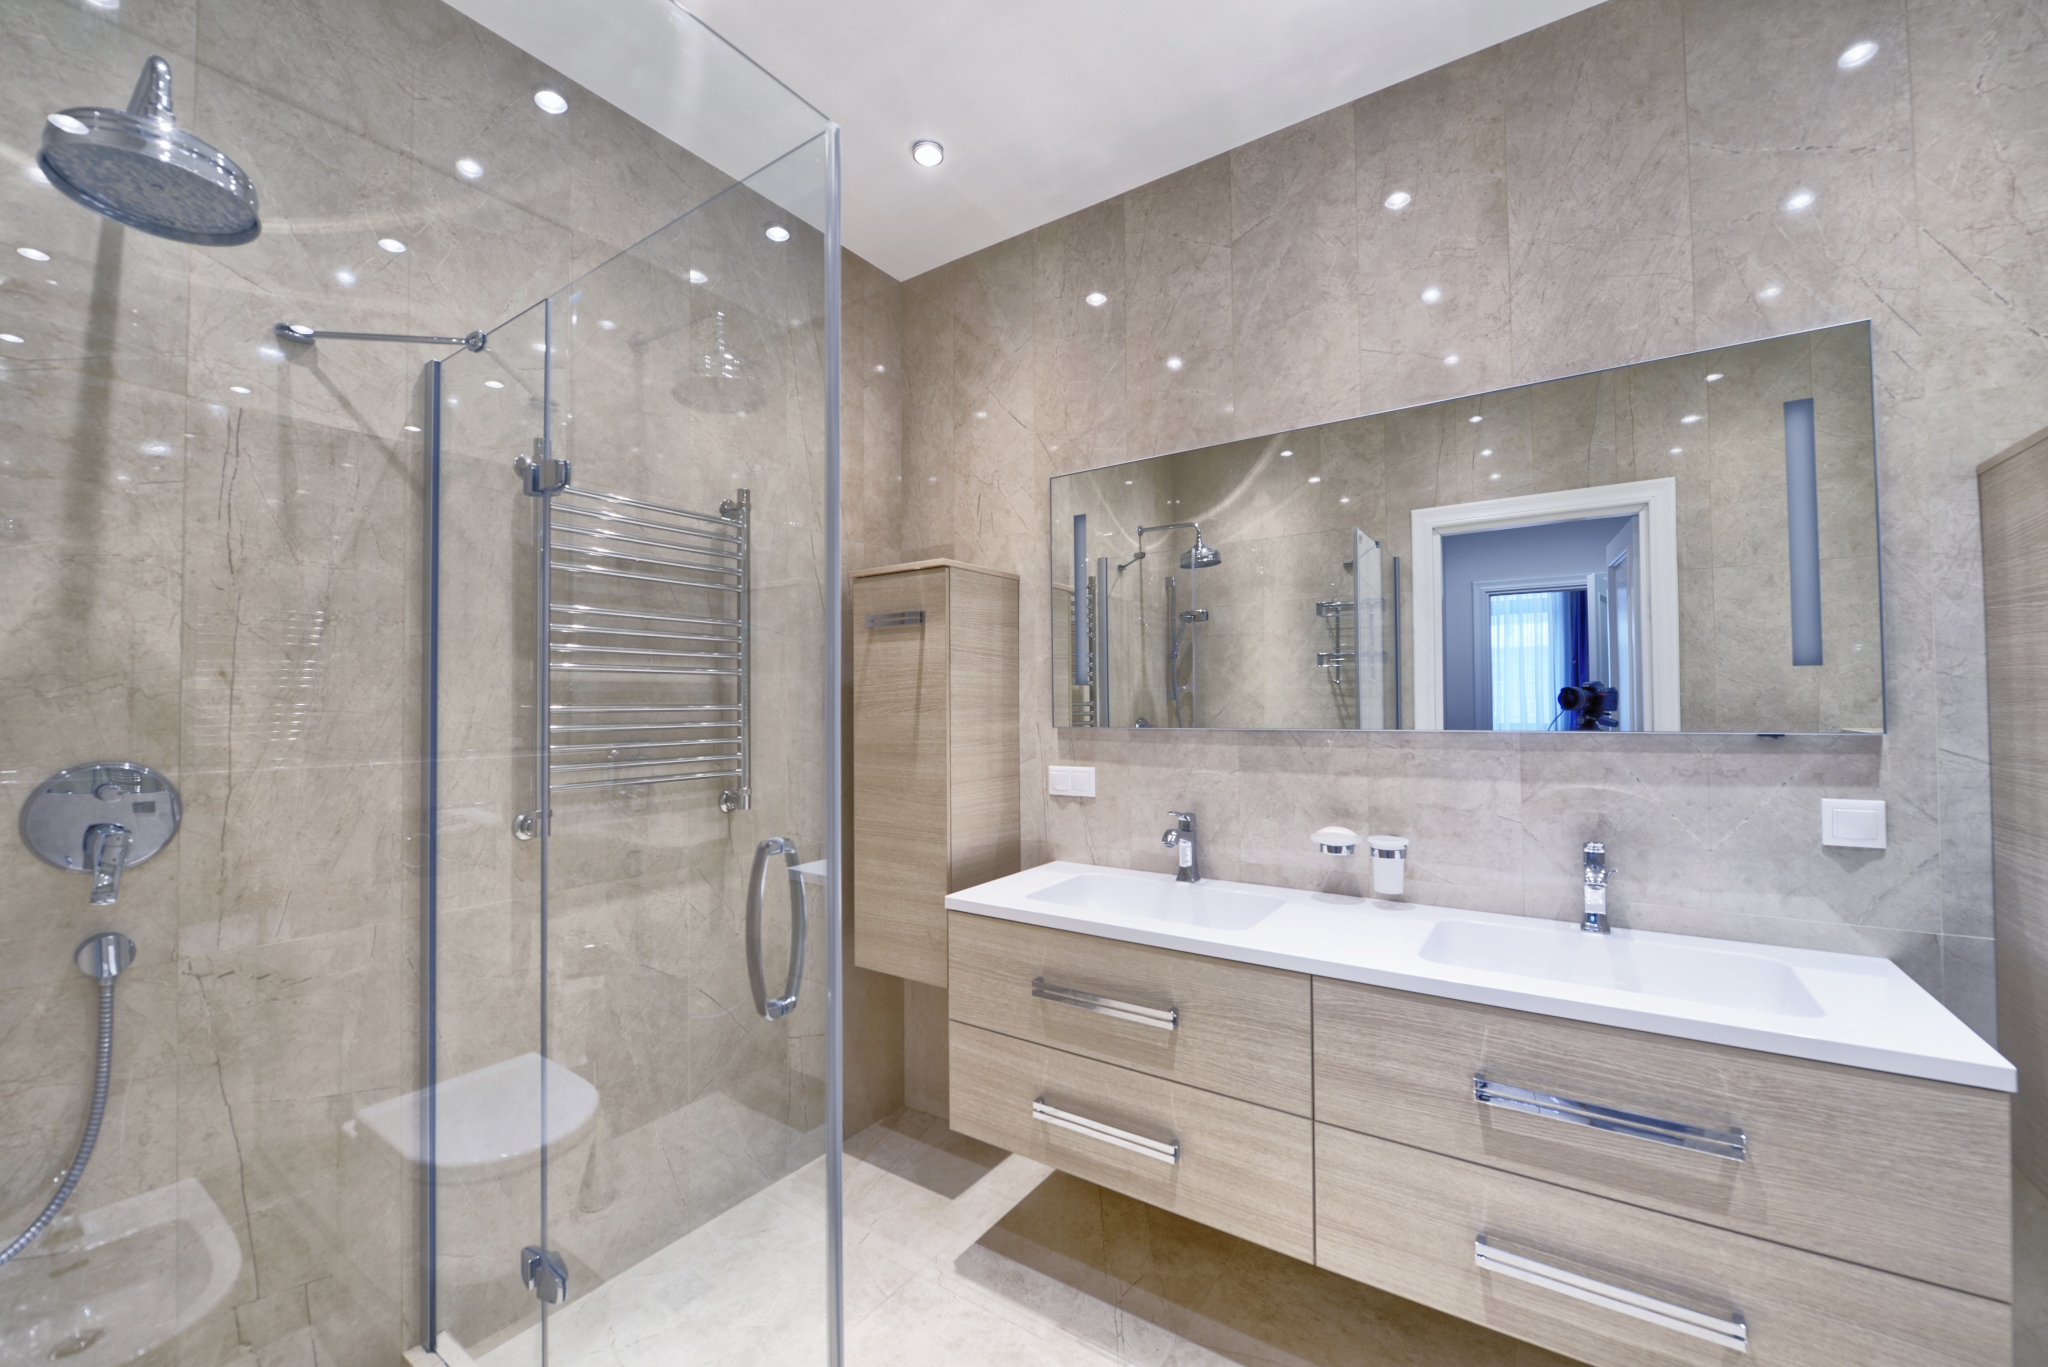 A bathroom with tan natural stone. Stone care is important when using it in hotel bathrooms.